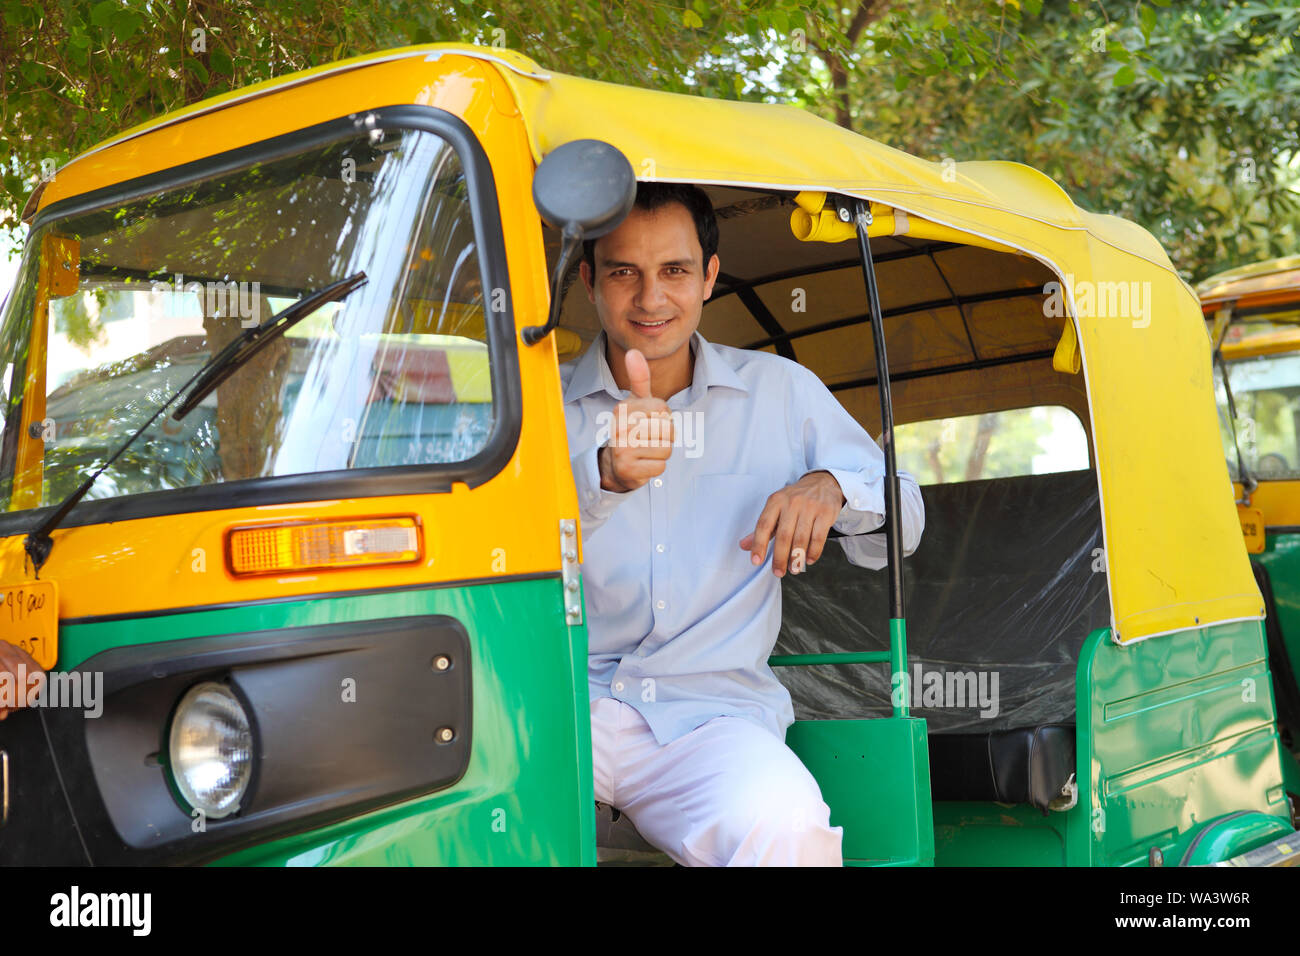 Auto driver sitting in an auto rickshaw and showing thumbs up sign Stock Photo